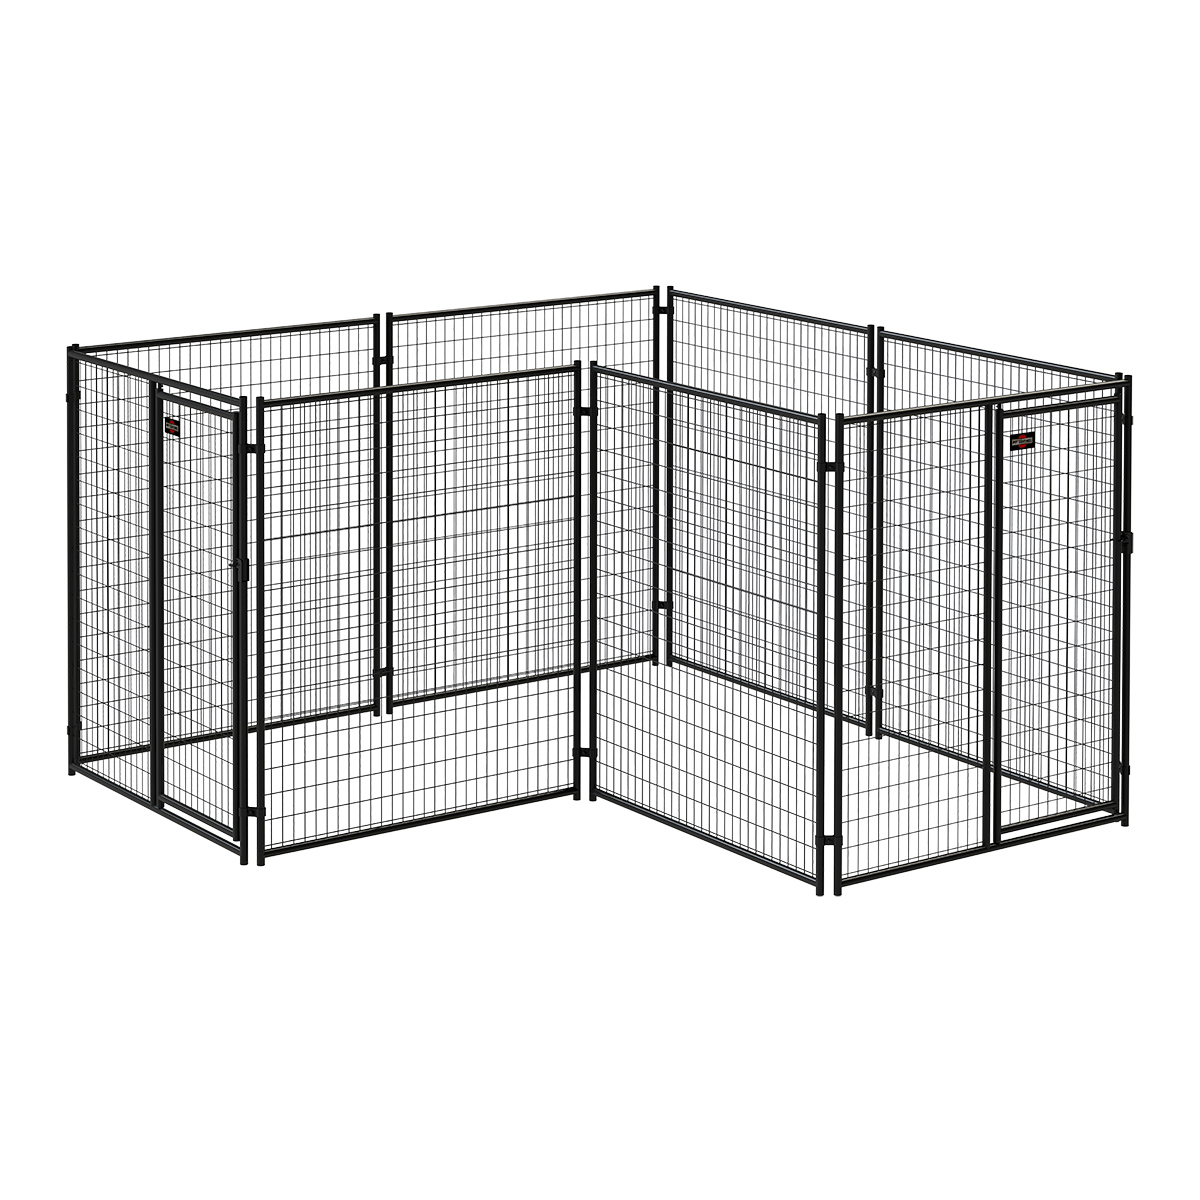 6ft H X 5ft W Welded Steel Kennel Panel Pet Kennels Crates Playpens